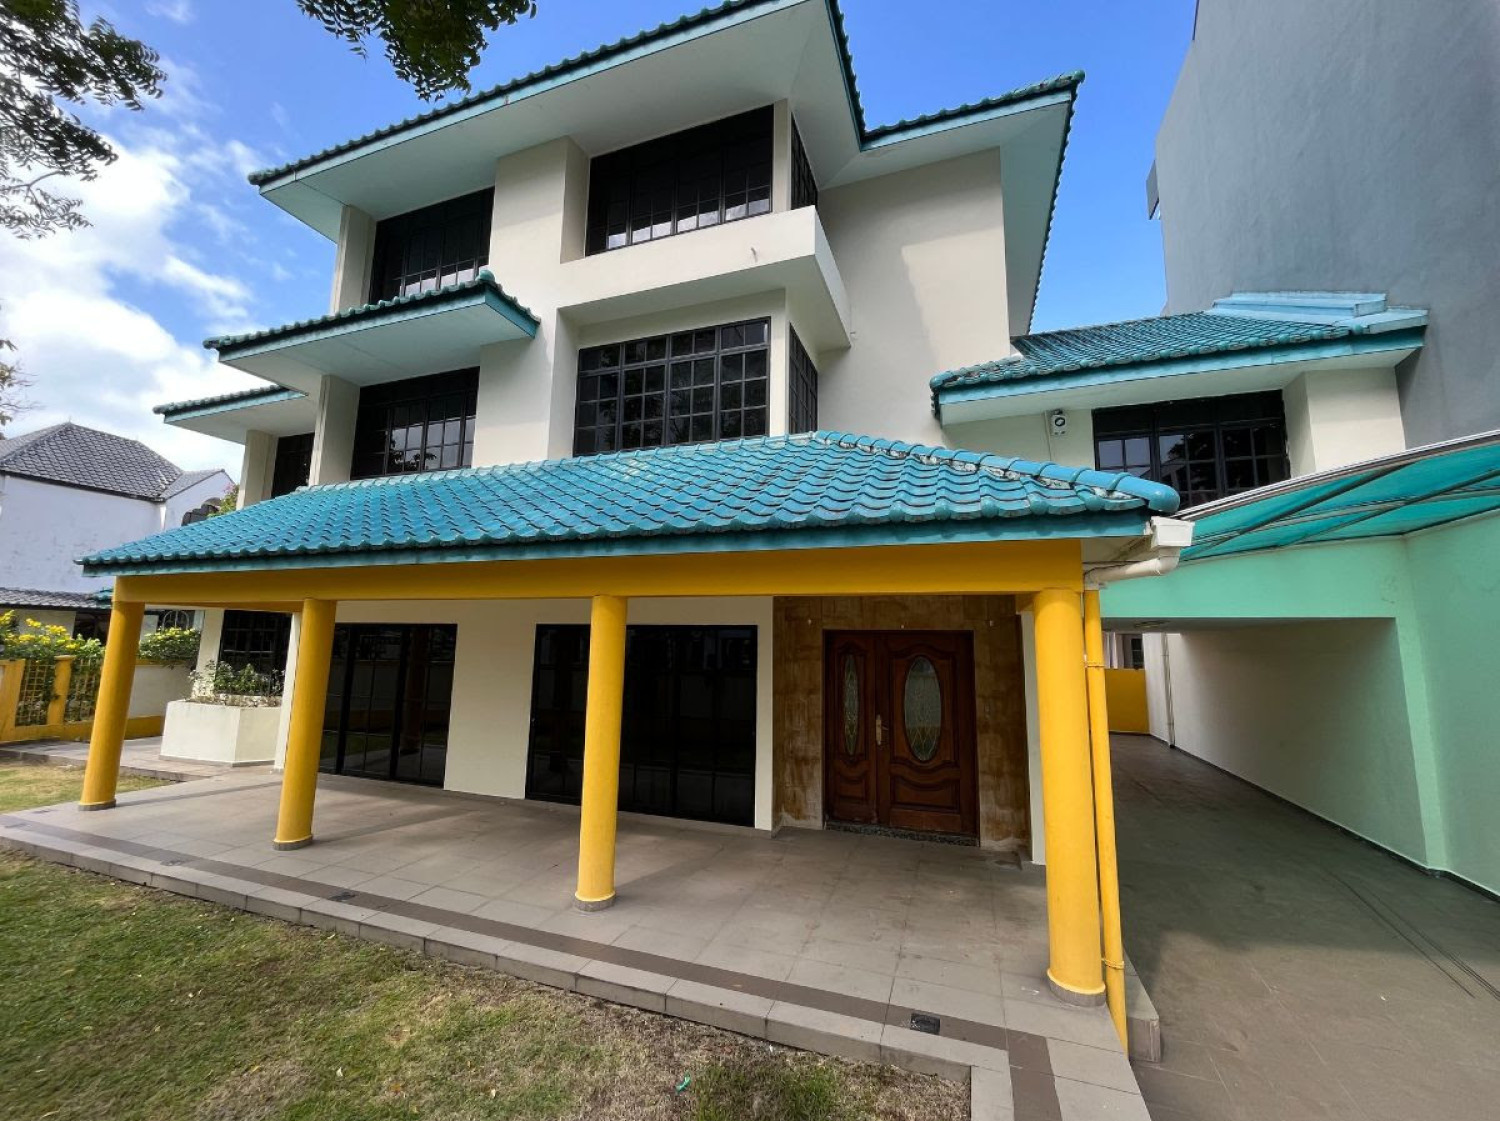 Semi-detached house at Lorong Melayu for sale at $6.38 mil - Property News